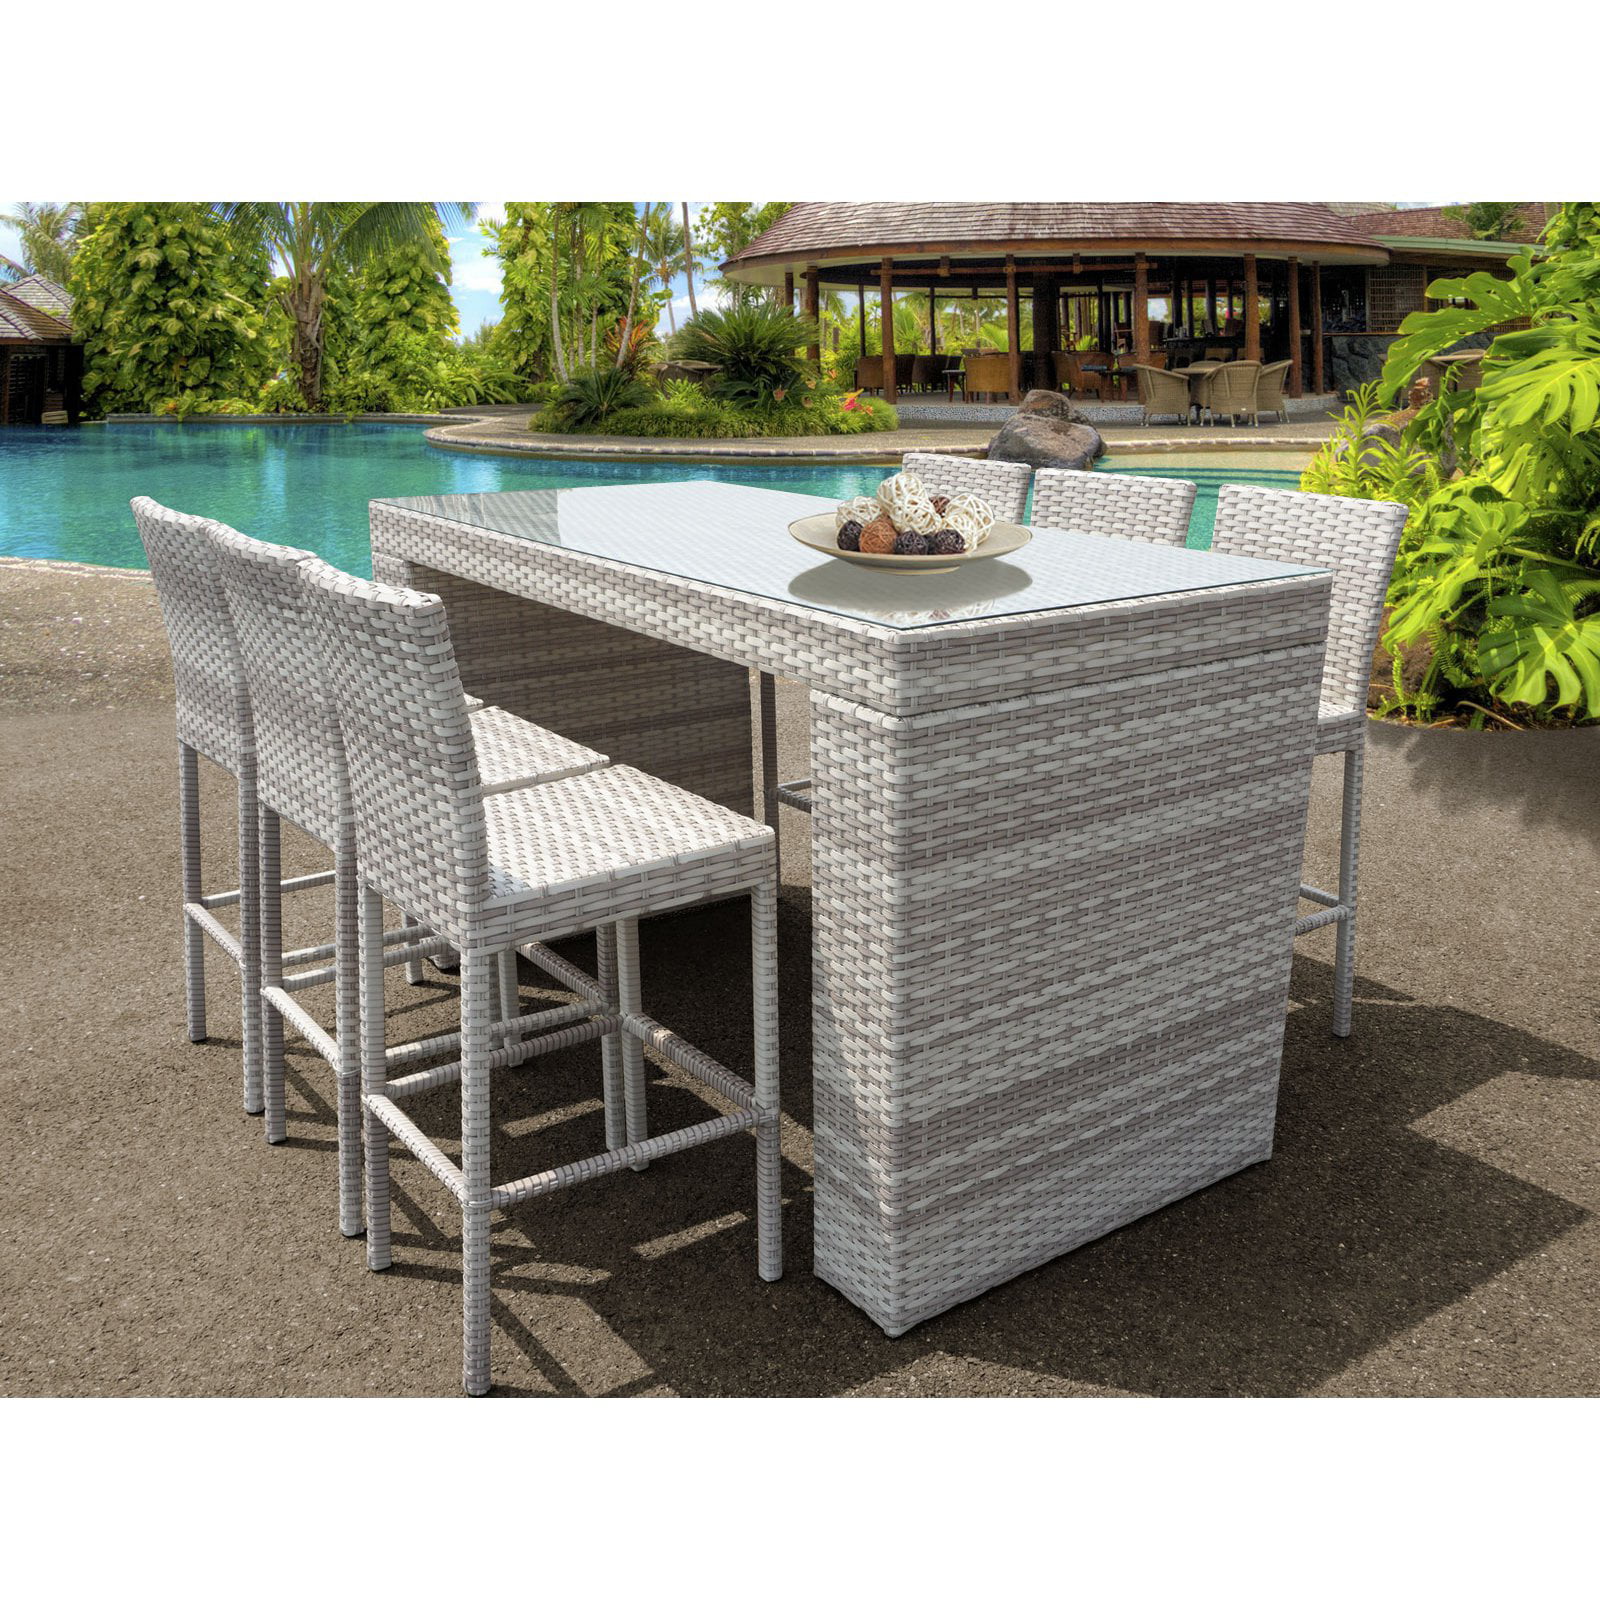 Wicker 7 Piece Patio Bar Table, Tkc Fairmont 7 Piece Counter Height Outdoor Dining Table And Chairs